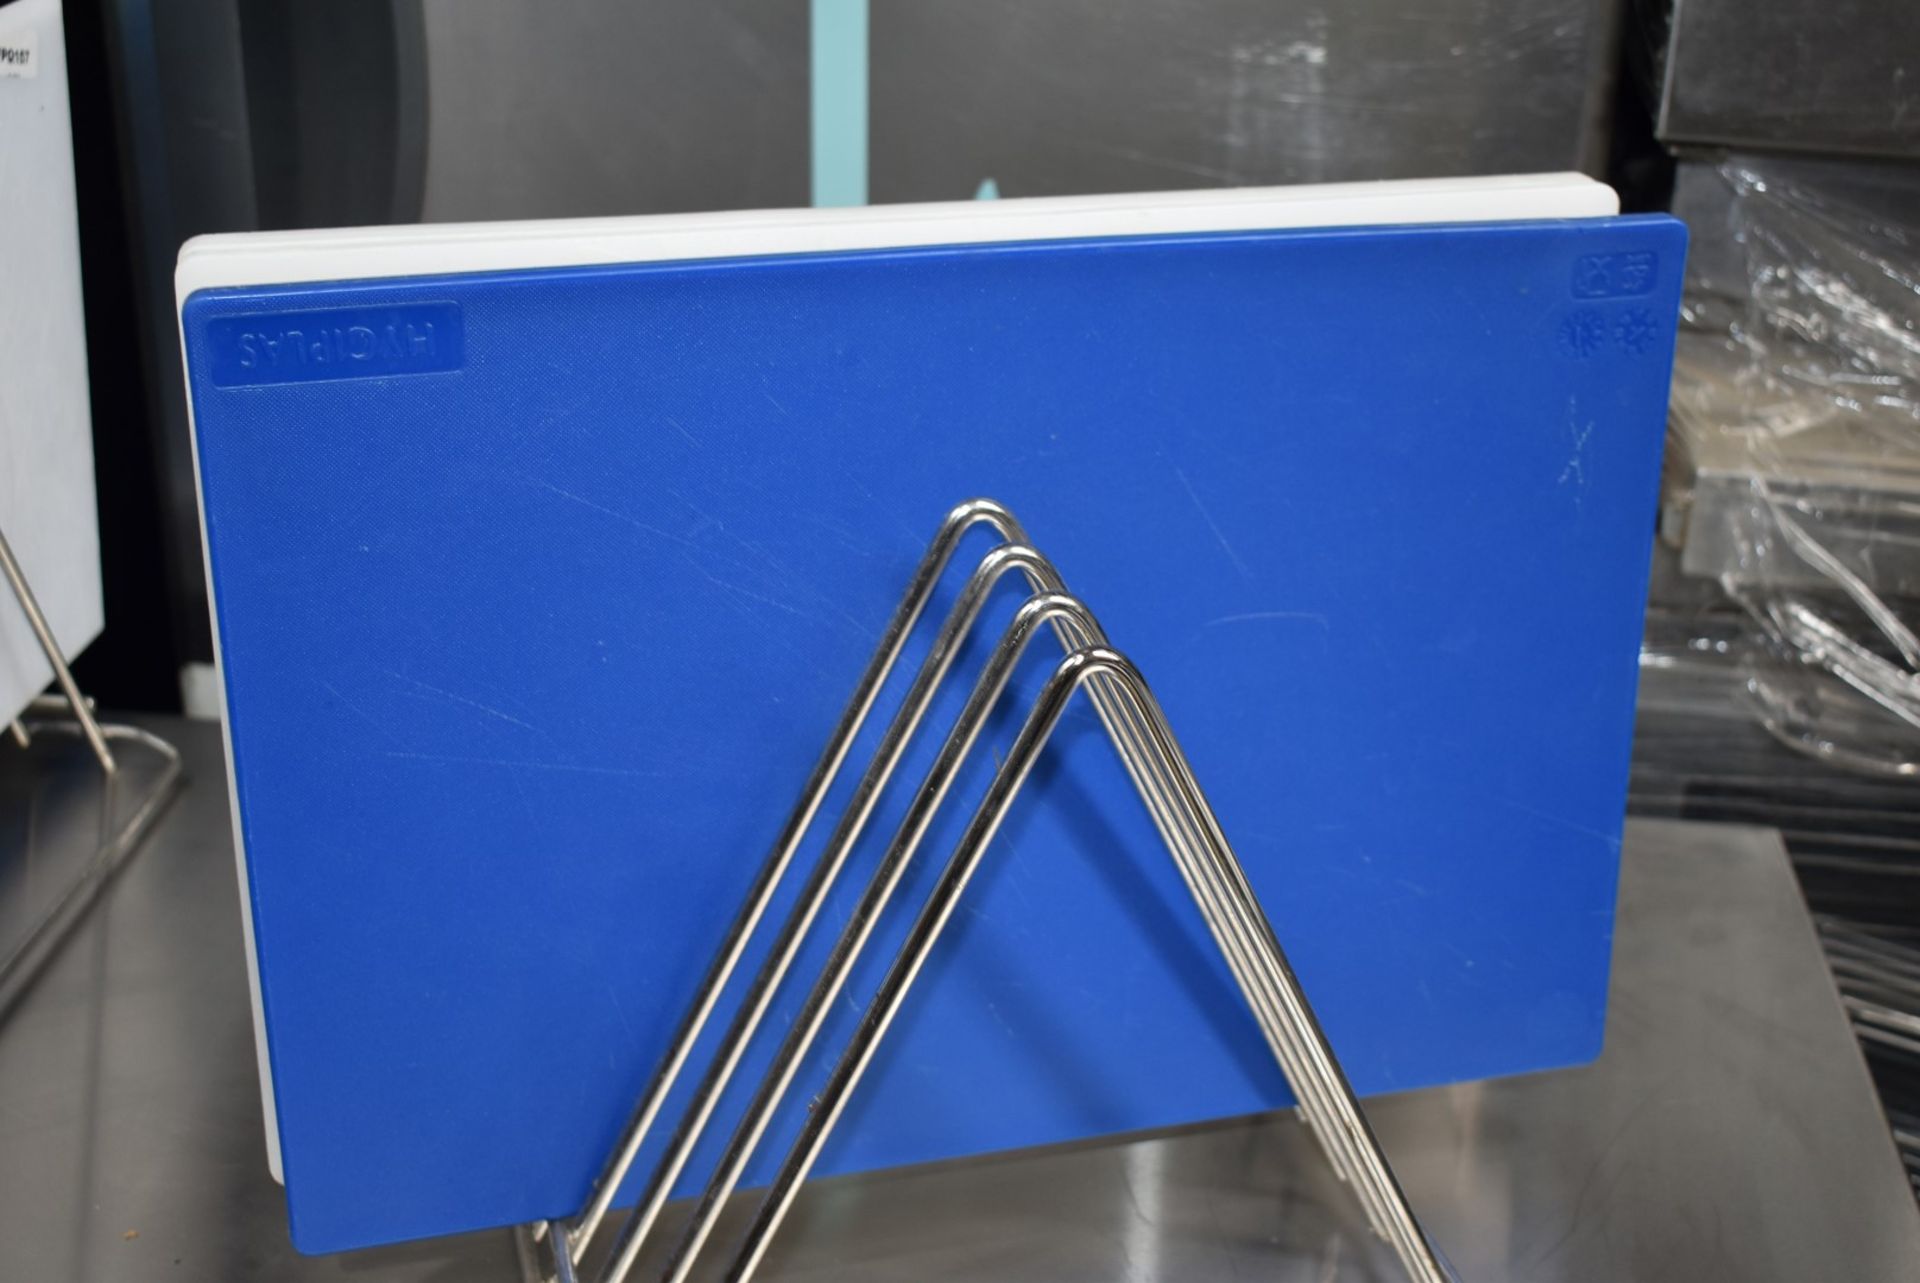 6 x Colour Coded Chopping Boards For Commercial Kitchens - Hygienic Plastic Design With Stand - Image 3 of 8